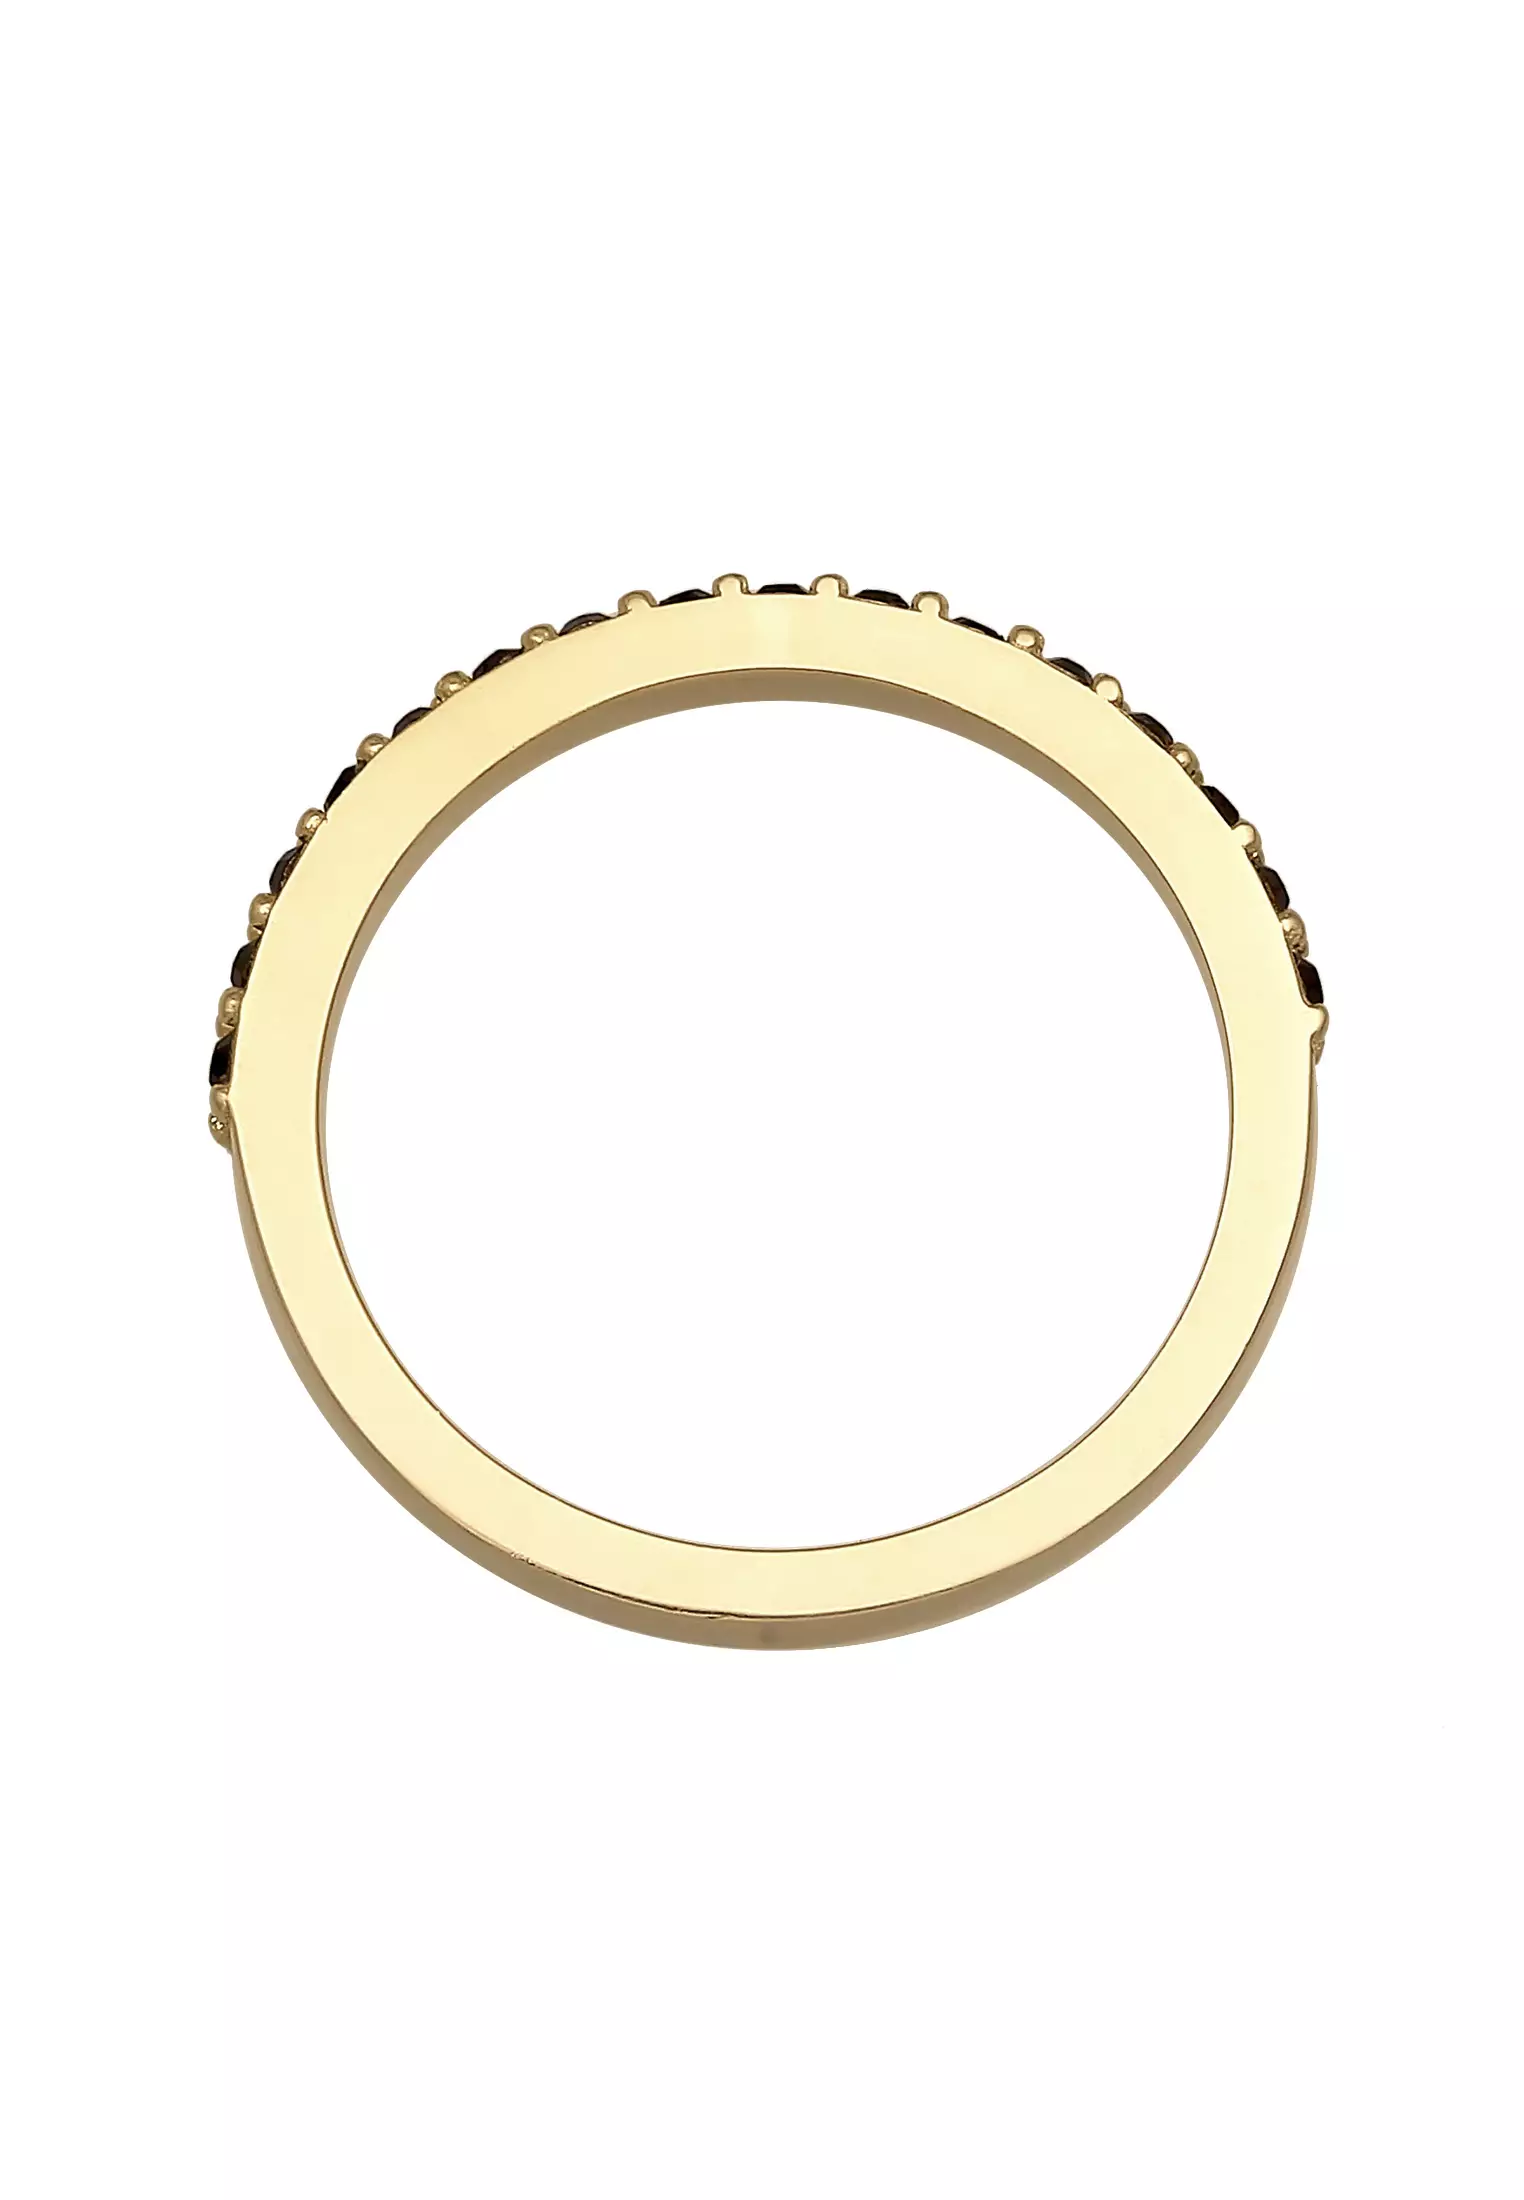 Buy Ring Band Malaysia Plated Crystals Online | ZALORA ELLI GERMANY Gold Memoire